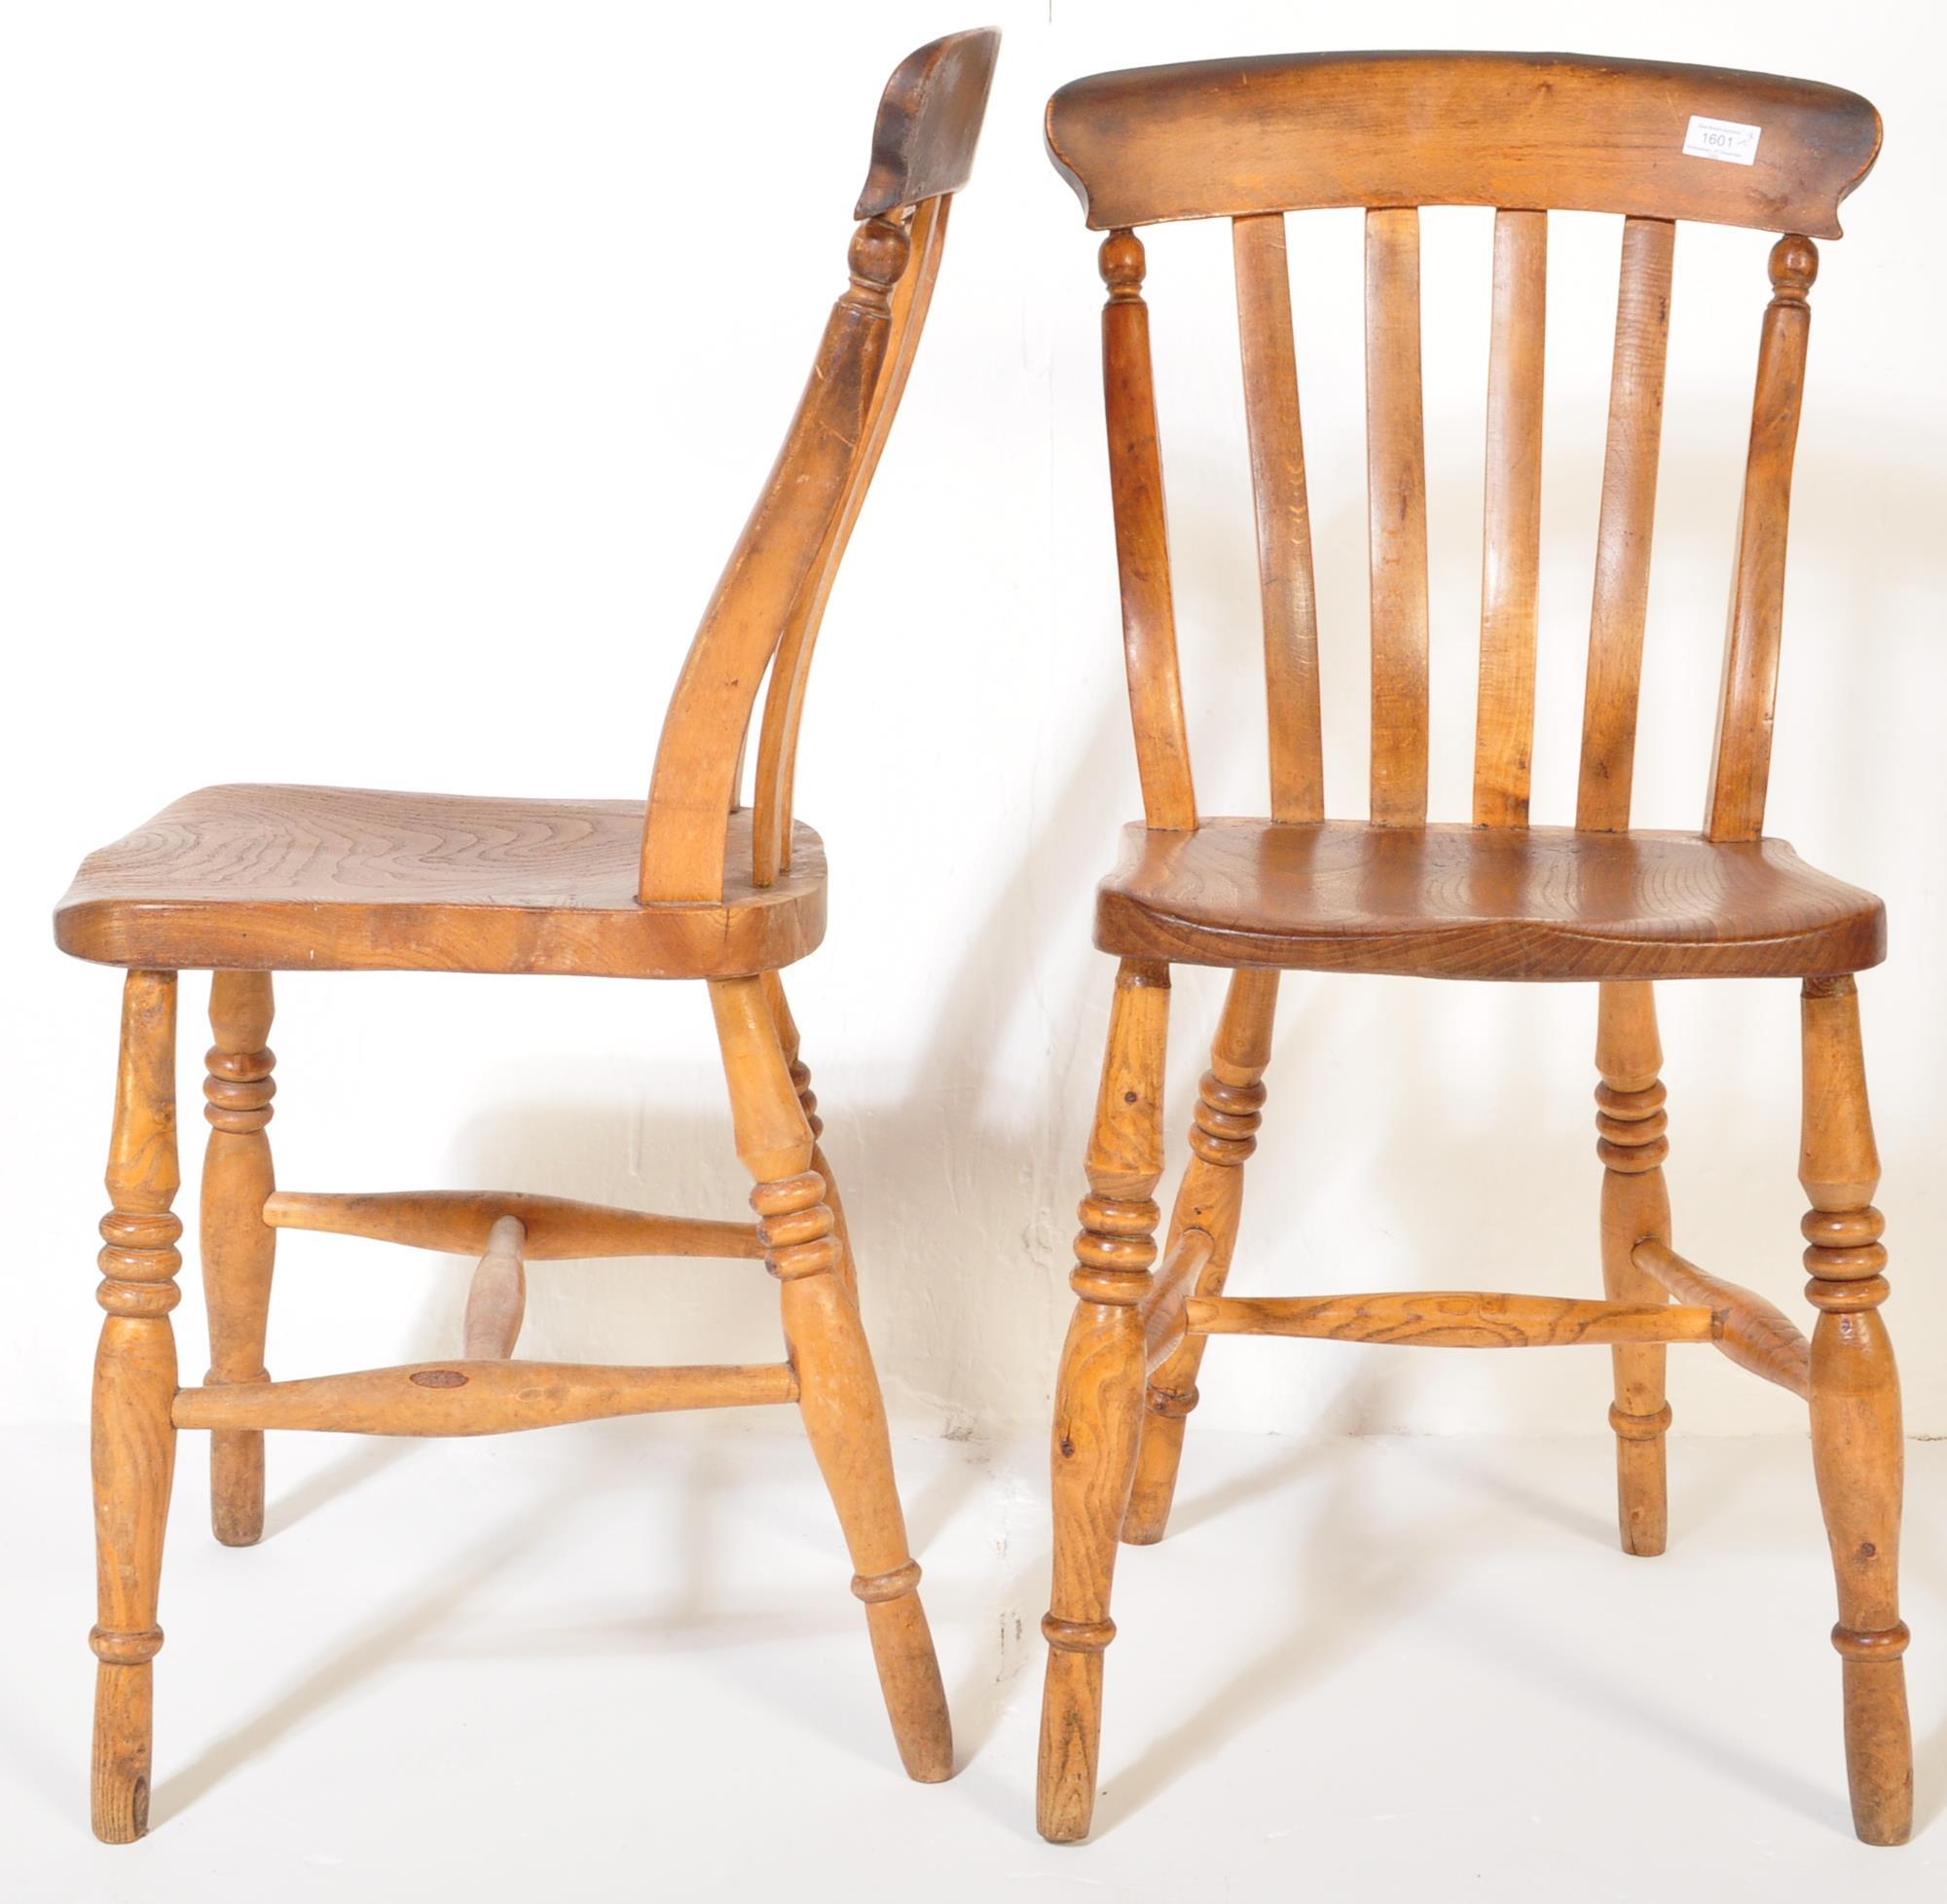 PAIR OF VICTORIAN BEECH & ELM FARMHOUSE WINDSOR CHAIRS - Image 3 of 5